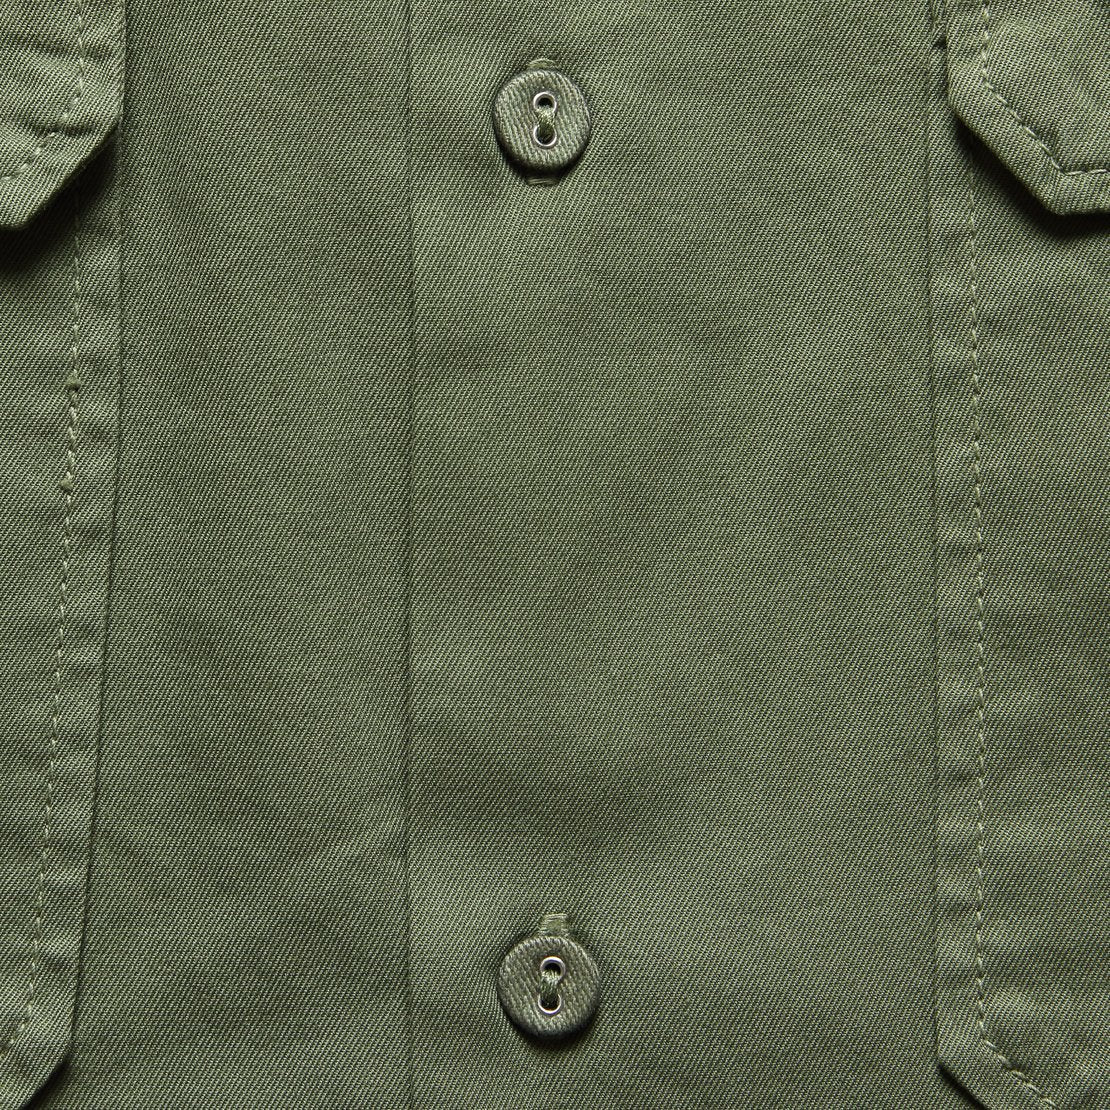 Light Twill Camp Shirt - Olive Drab - Save Khaki - STAG Provisions - Tops - S/S Woven - Solid